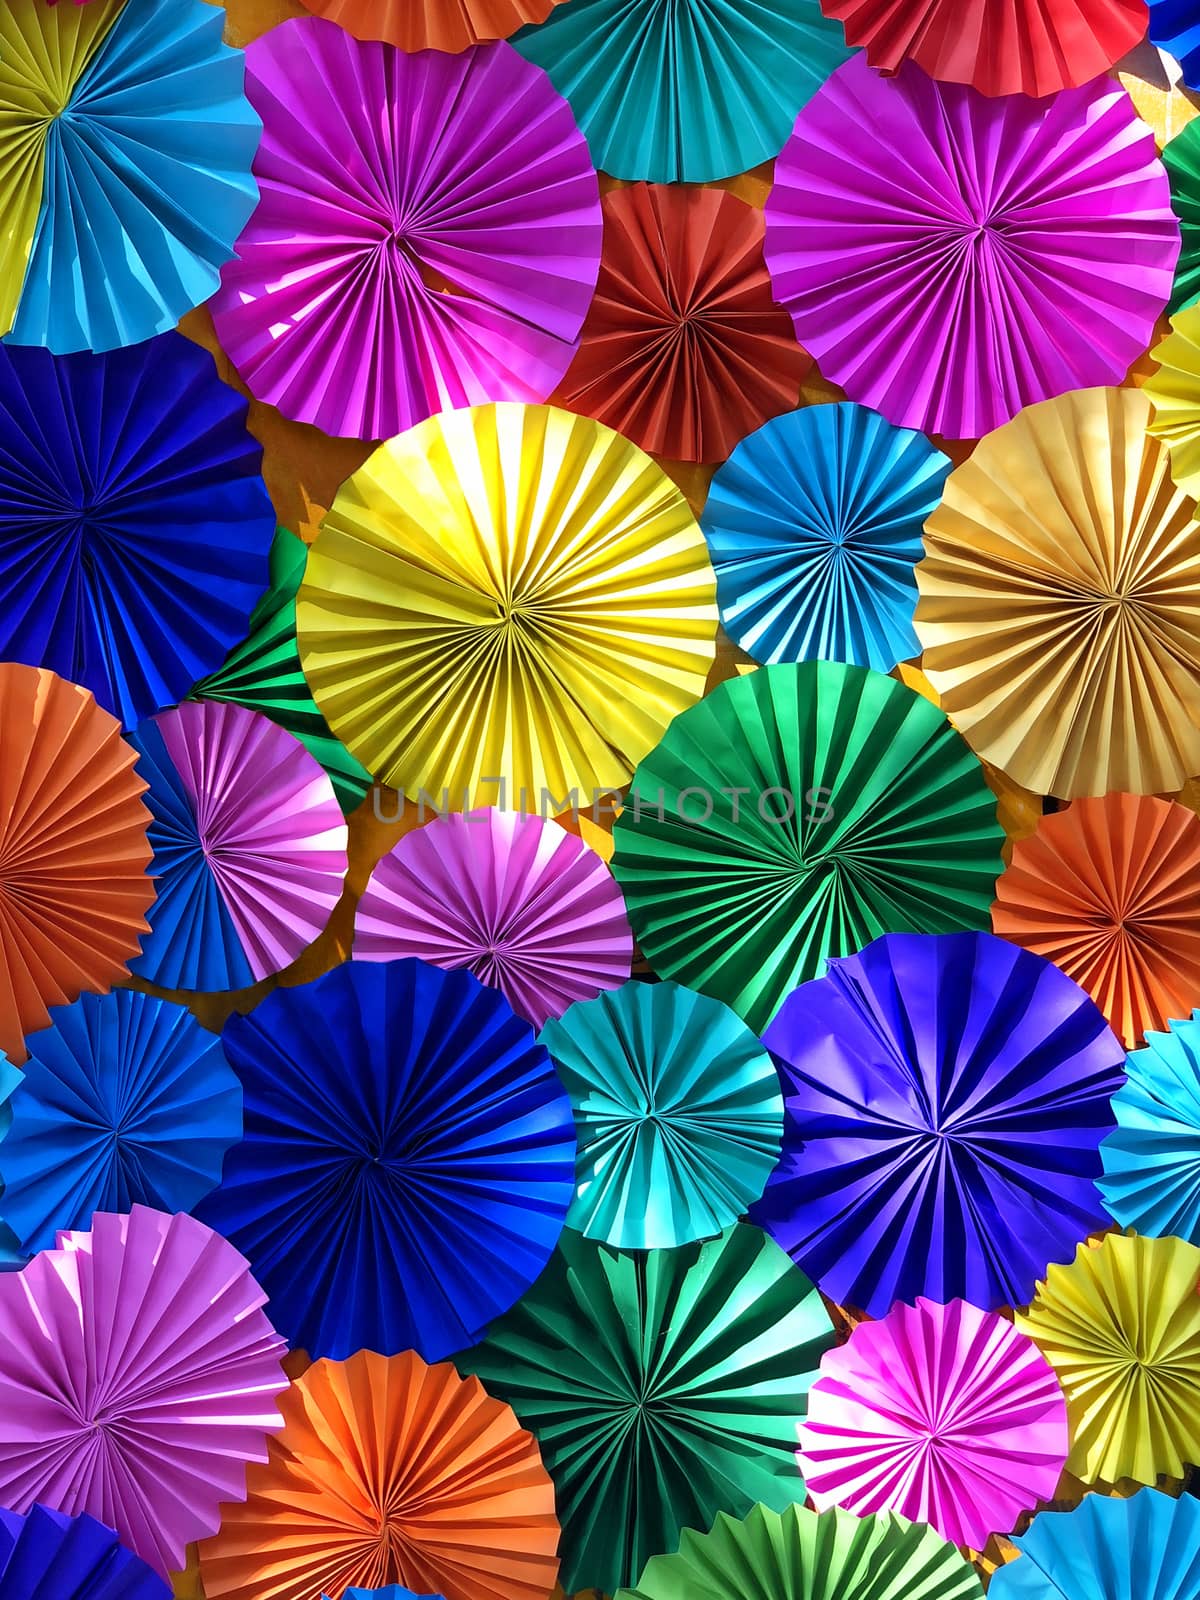 Colorful real paper background in daylight